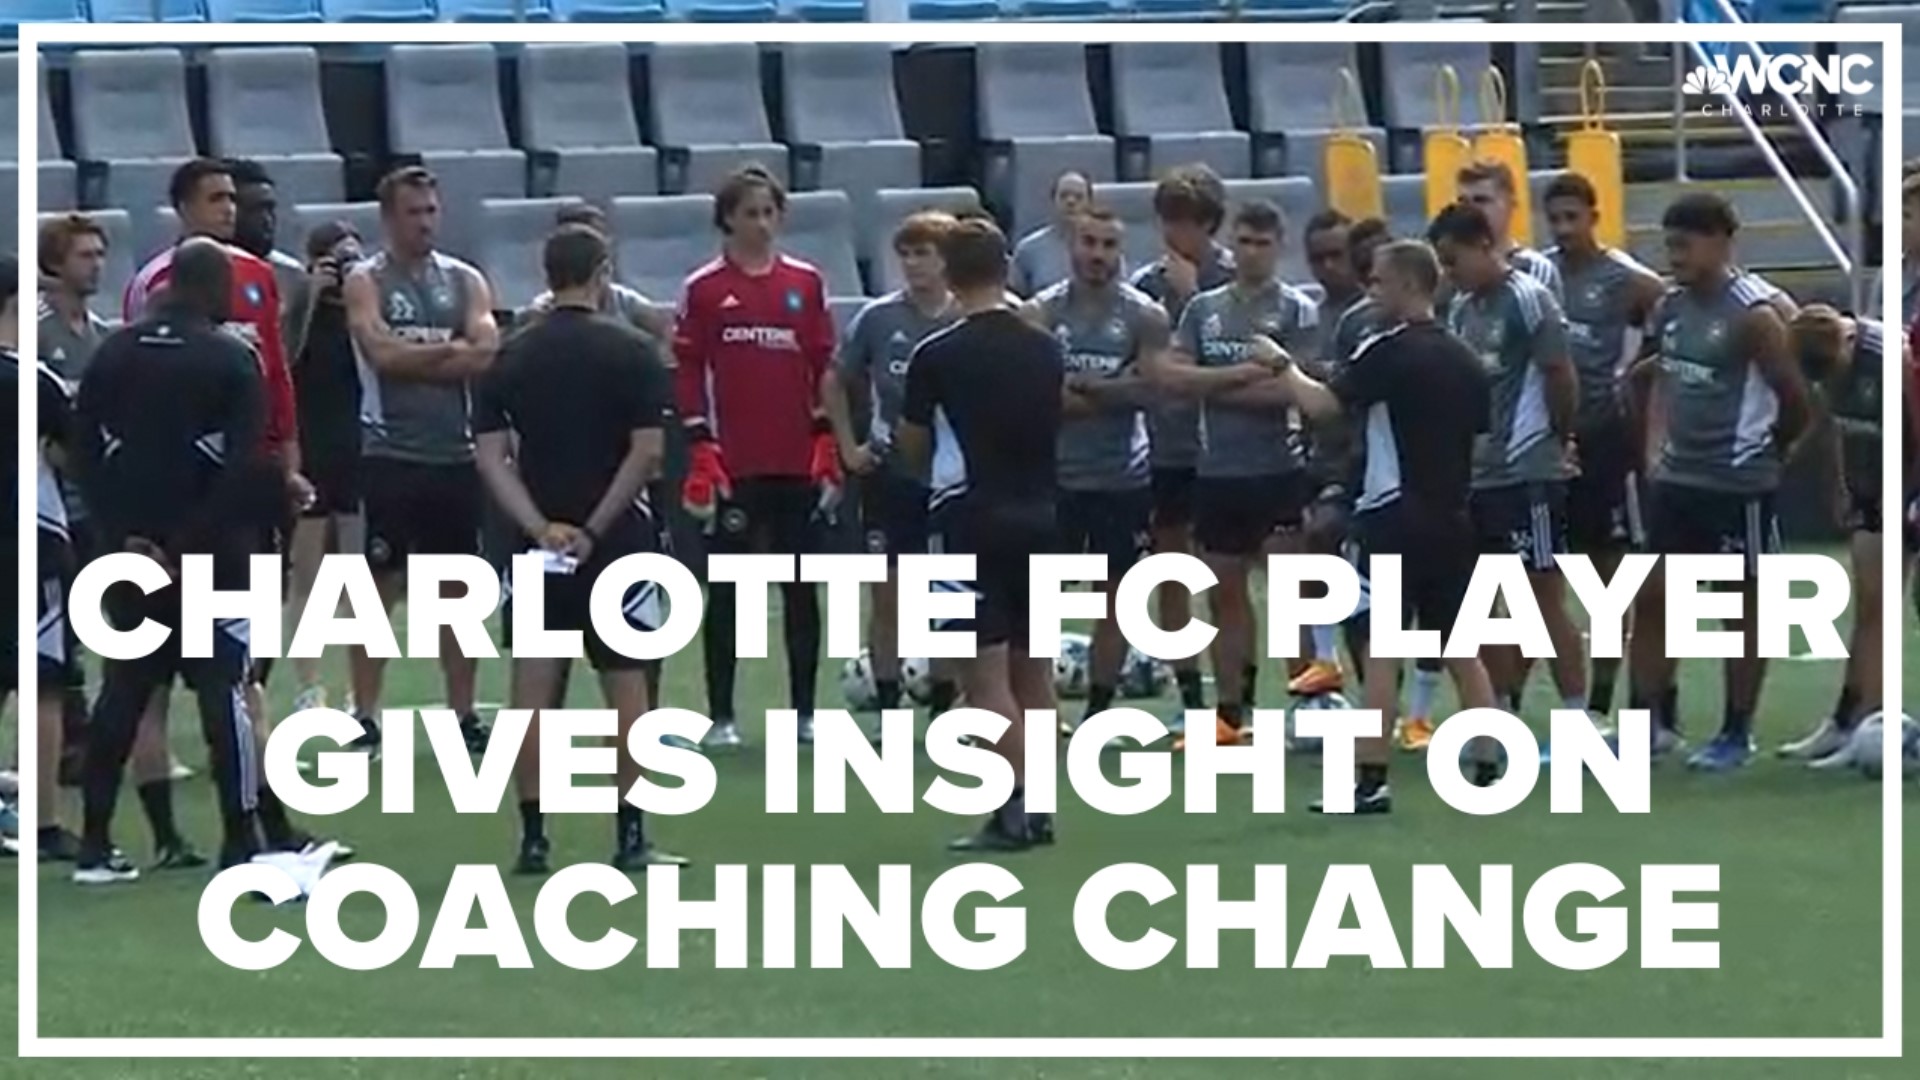 It has been one week since Charlotte FC annonced it parted ways with its head coach.